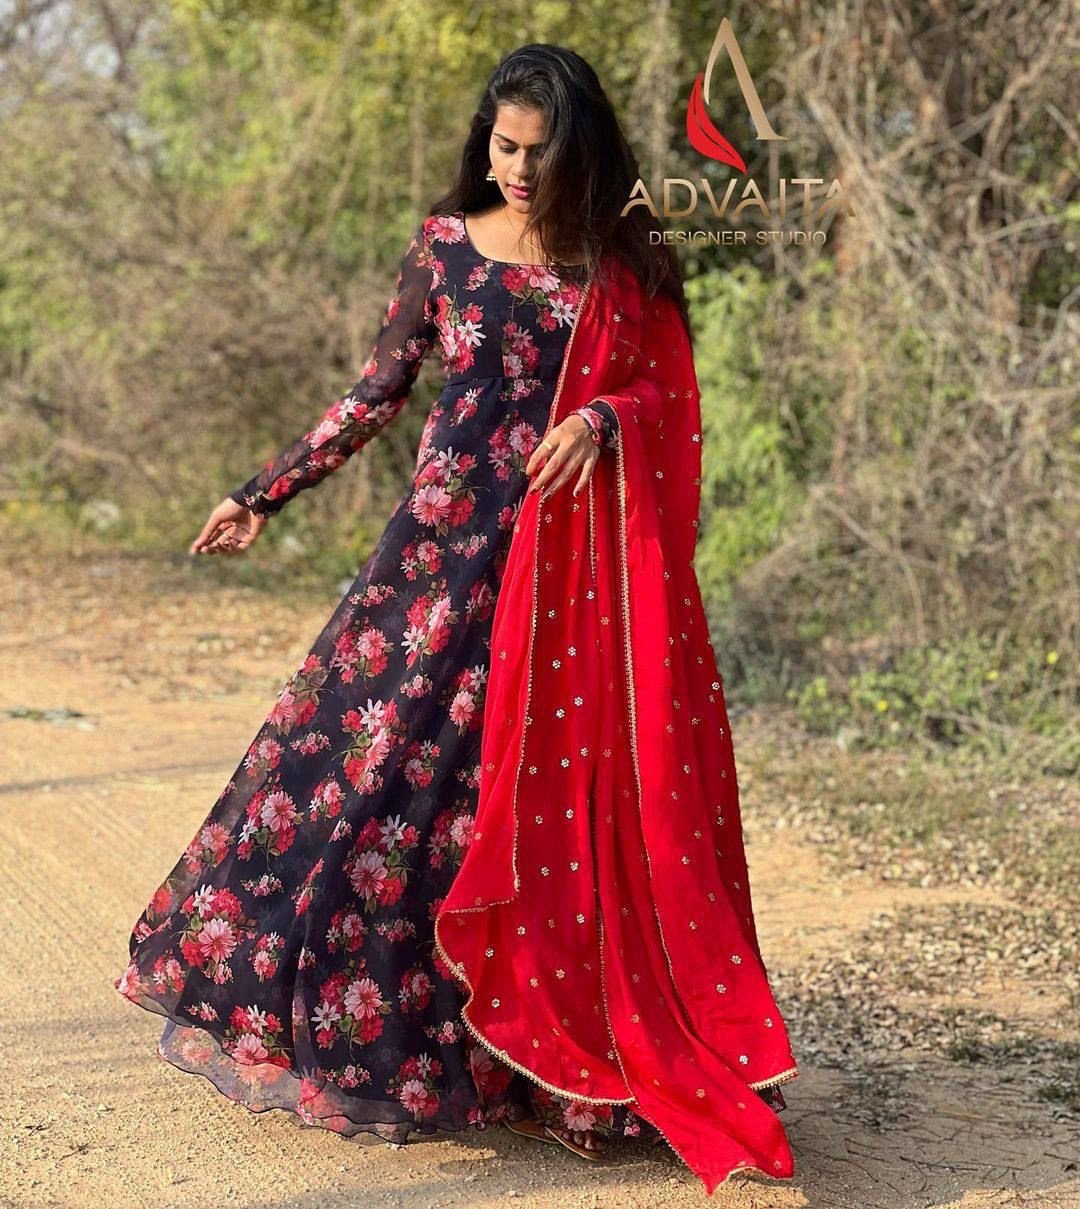 Edathal Star Collection's Attractive & Stylish Fox Georgette Full Length Full Sleeve Frock With Duppatta & Lining